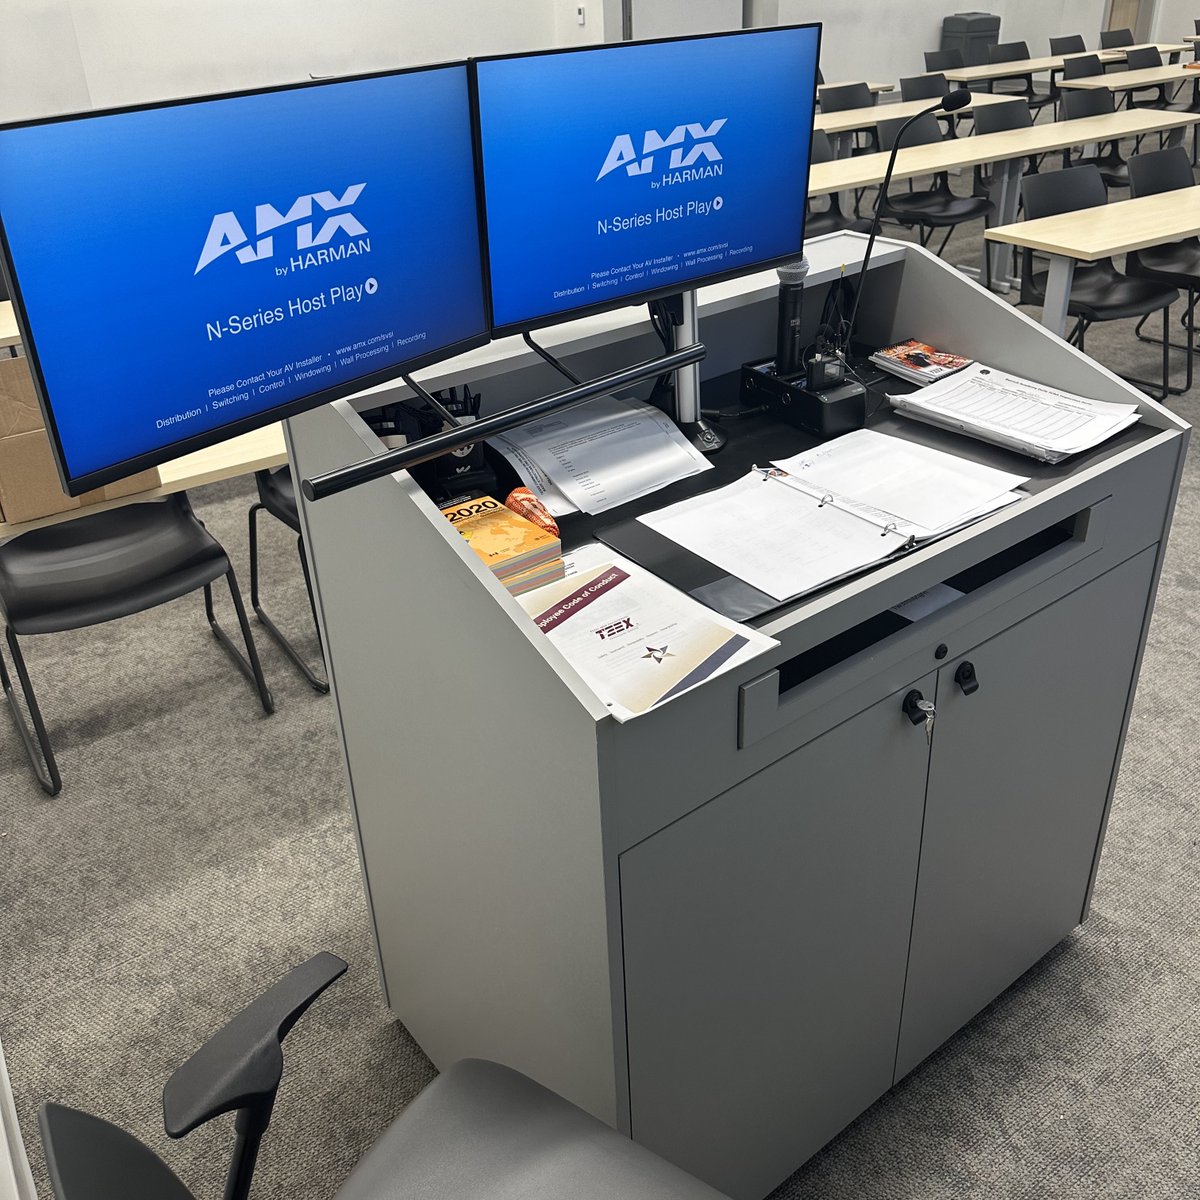 If you’re presenting in a classroom, lecture hall, or conference room, our lecterns and presentation furniture are the perfect addition to any learning environment.
#systemintegration #avready #lecterns #podiums #avfurniture #avtweeps #ADAfurniture #credenza #avrack